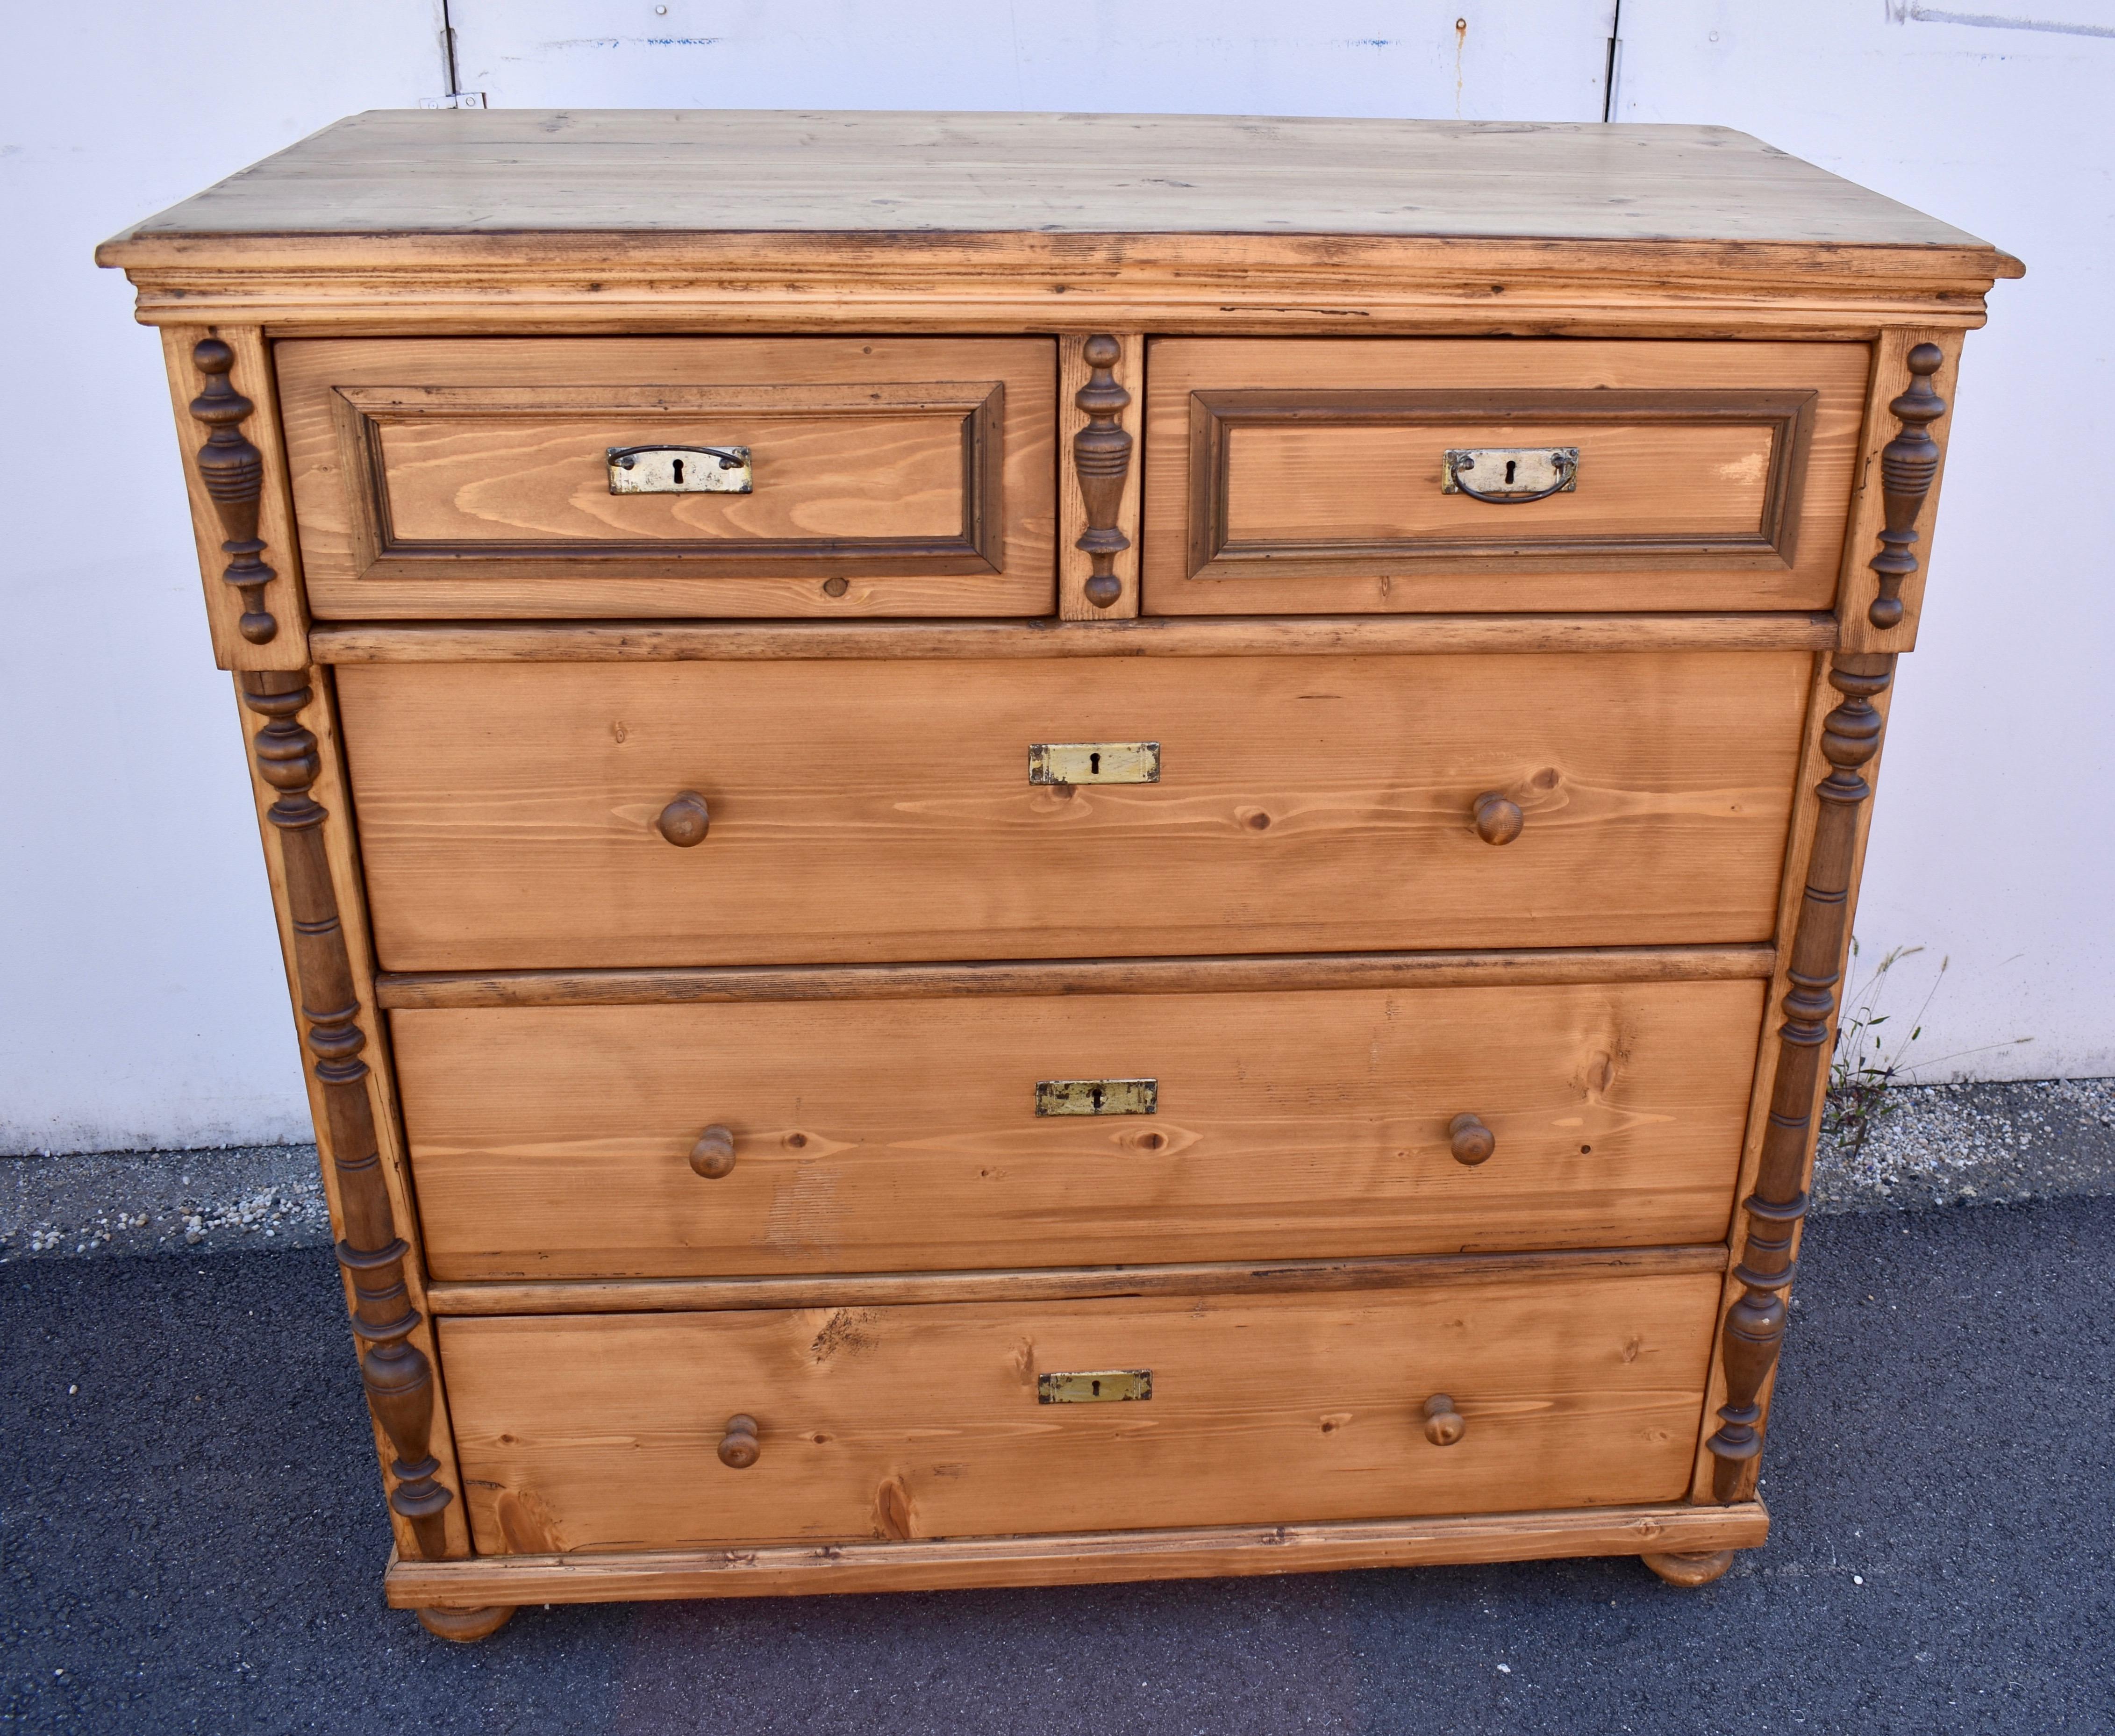 What a handsome Chest of Drawers!  What a stately presence for the master bedroom.  The step-down edge of the crown is augmented by an ogee molding beneath.  The two short top drawers stand proud of the face with hardwood trim creating faux panels. 